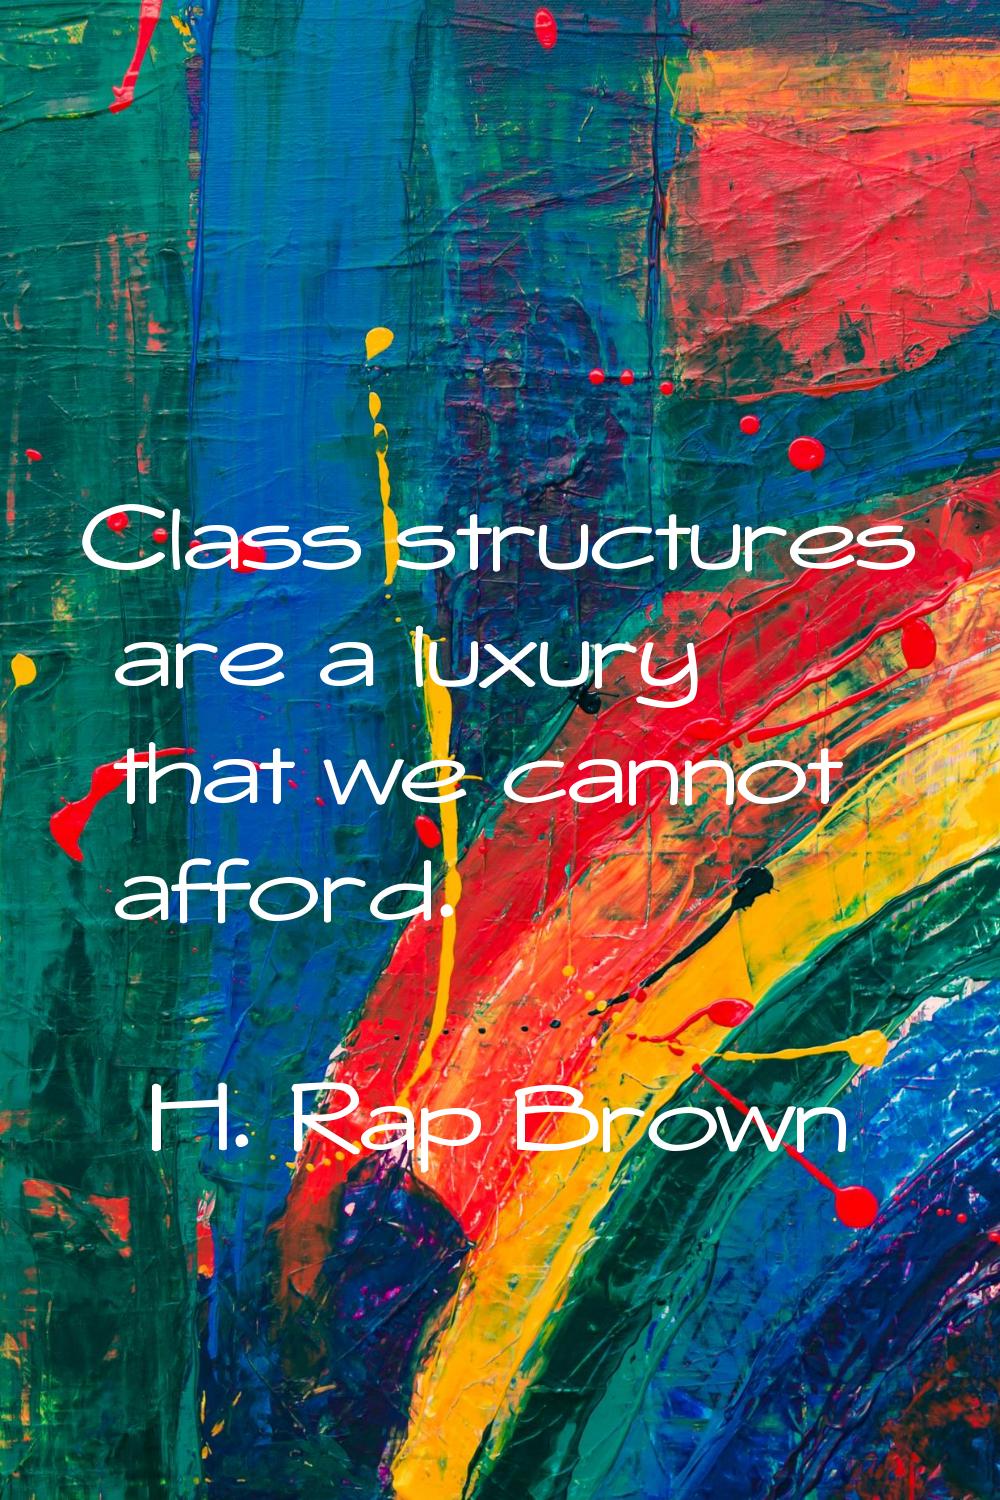 Class structures are a luxury that we cannot afford.